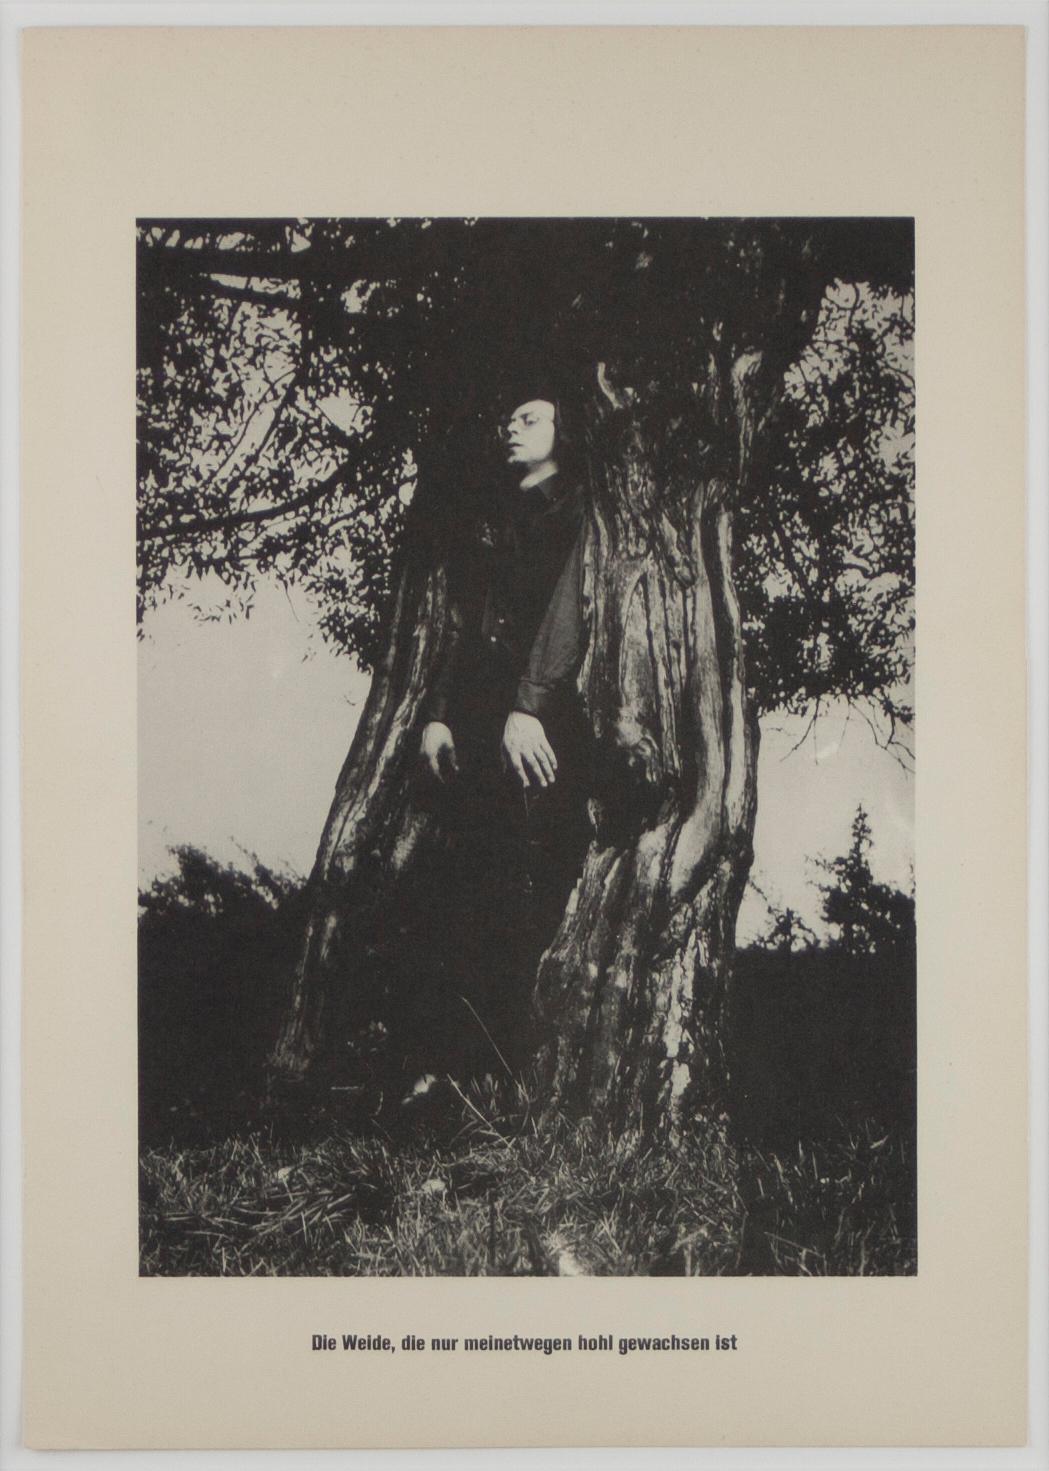 "The Tree that grew hollow because of me", unframed black and white print